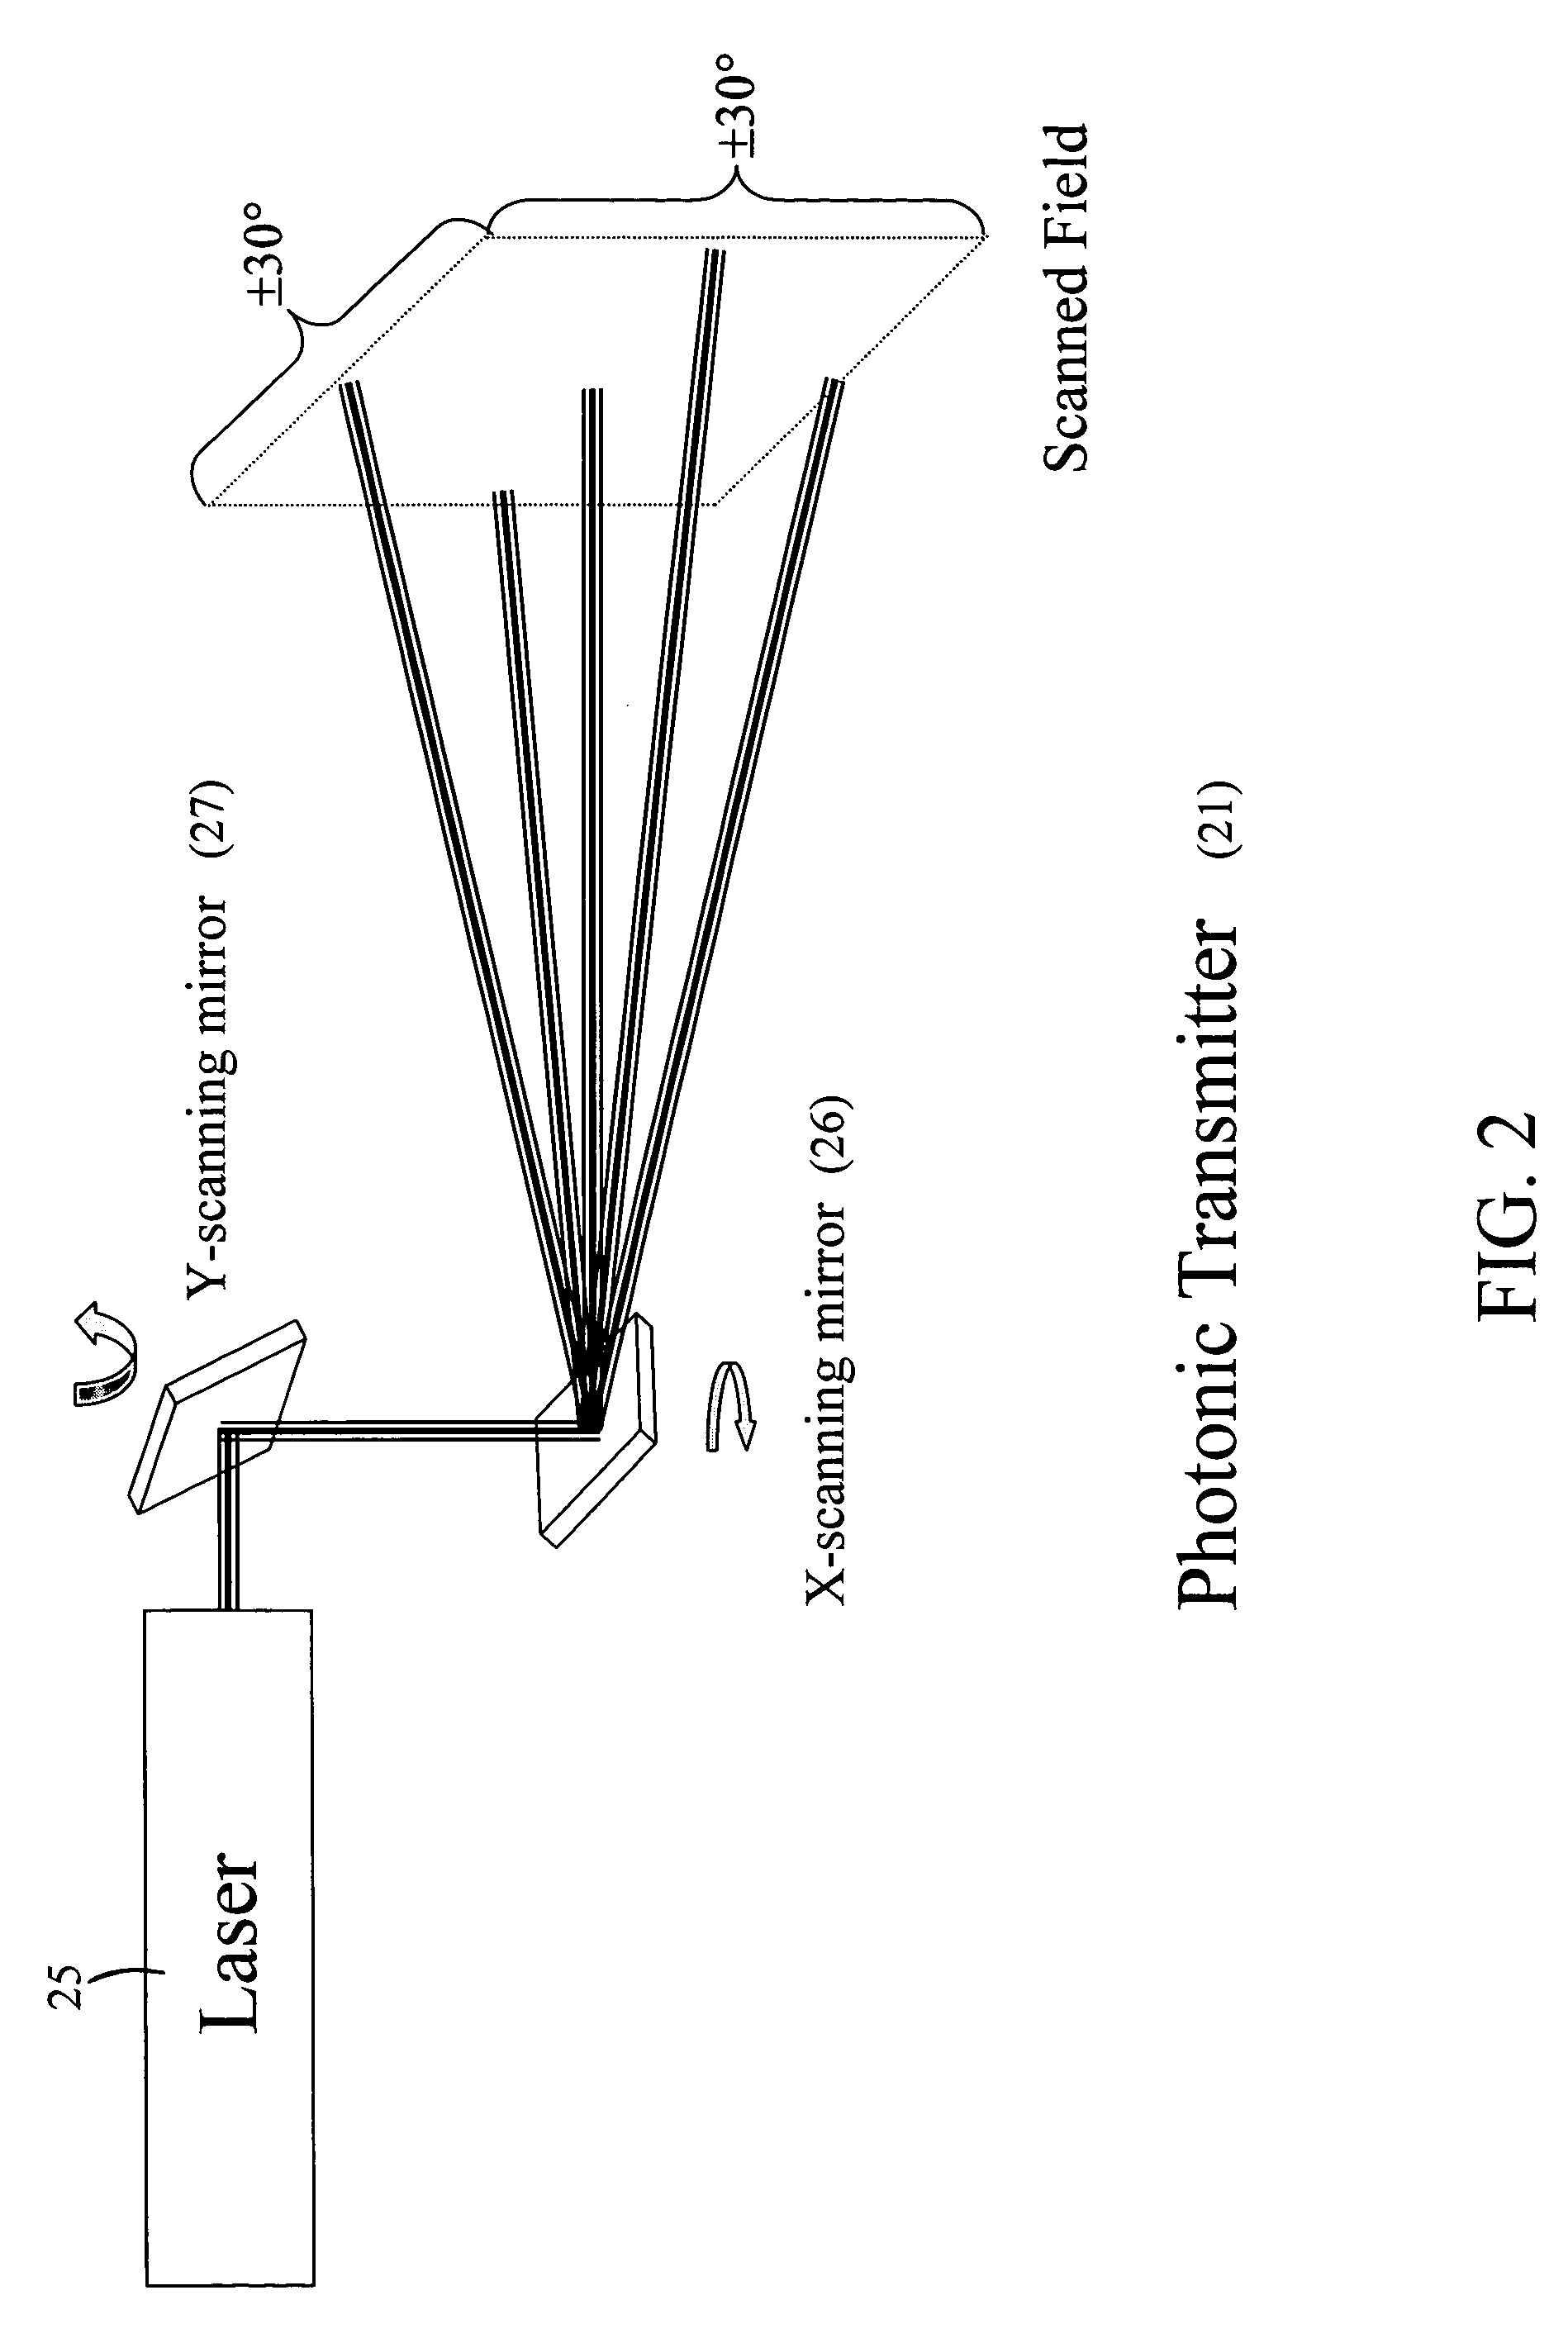 Laser scanning system for object monitoring